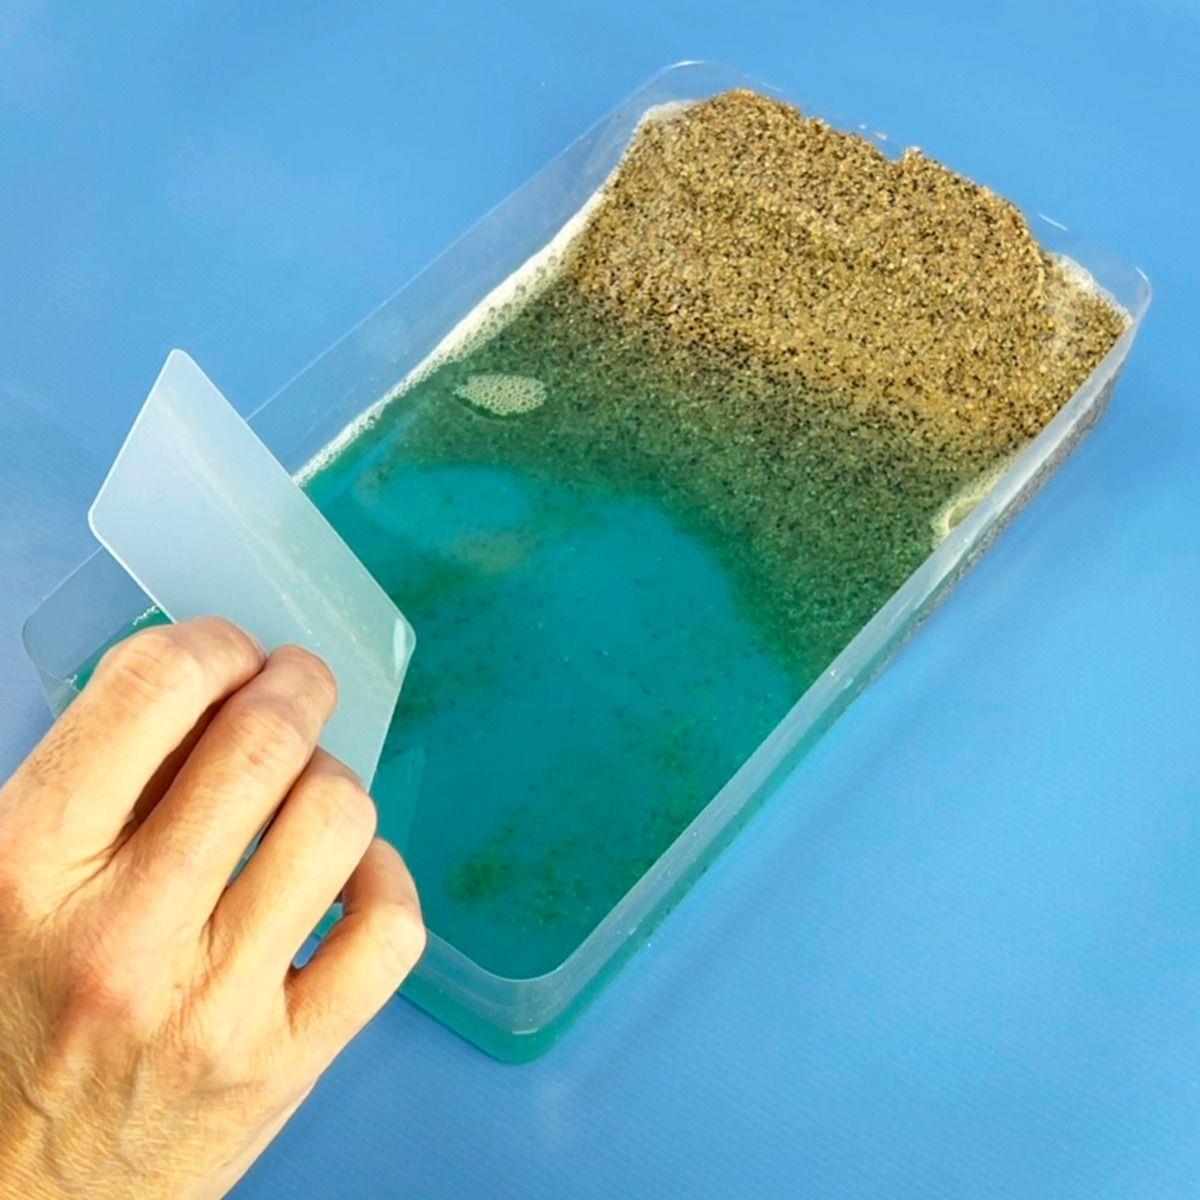 Epic Lab Ocean Discovery Erosion, Currents and Density Kit